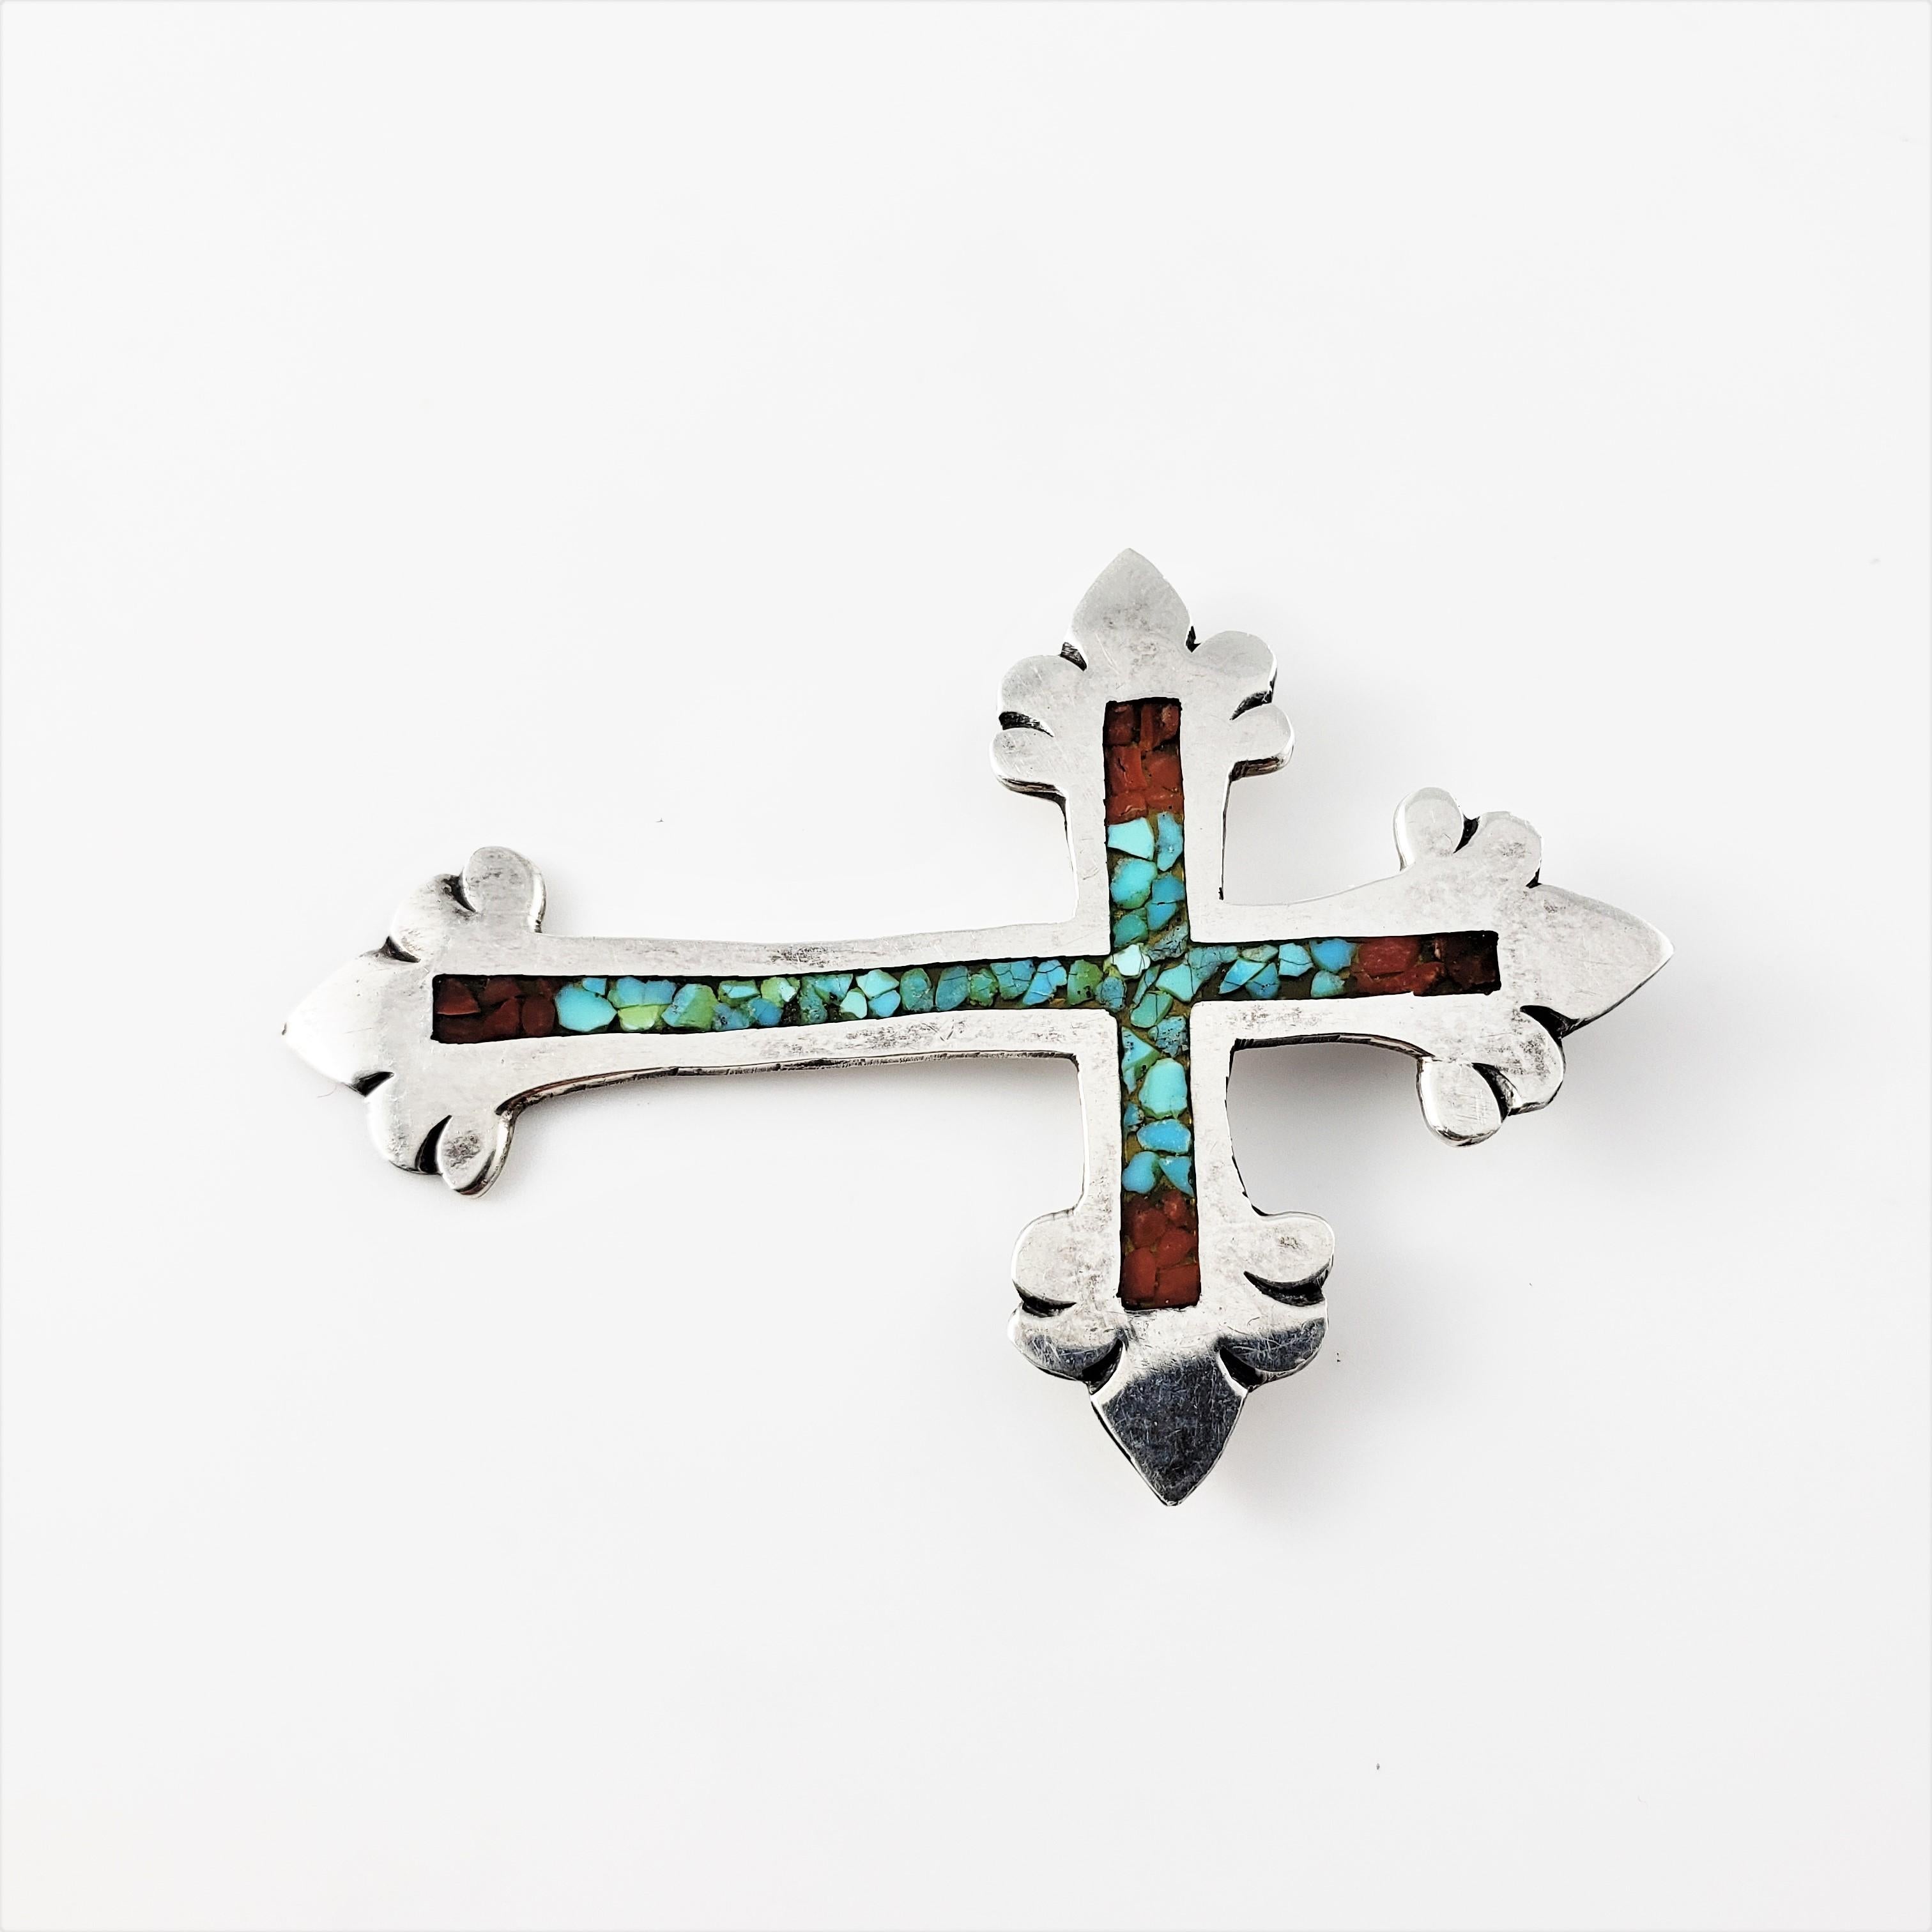 Vintage Navajo Charlie Singer Crushed Turquoise and Coral Silver Cross Pendant-

This cross pendant is decorated with crushed turquoise and coral set in beautifully detailed silver.

Size: 2.4 inches x 1.7 inches

Bale opening: 3 mm

Weight: 4.1